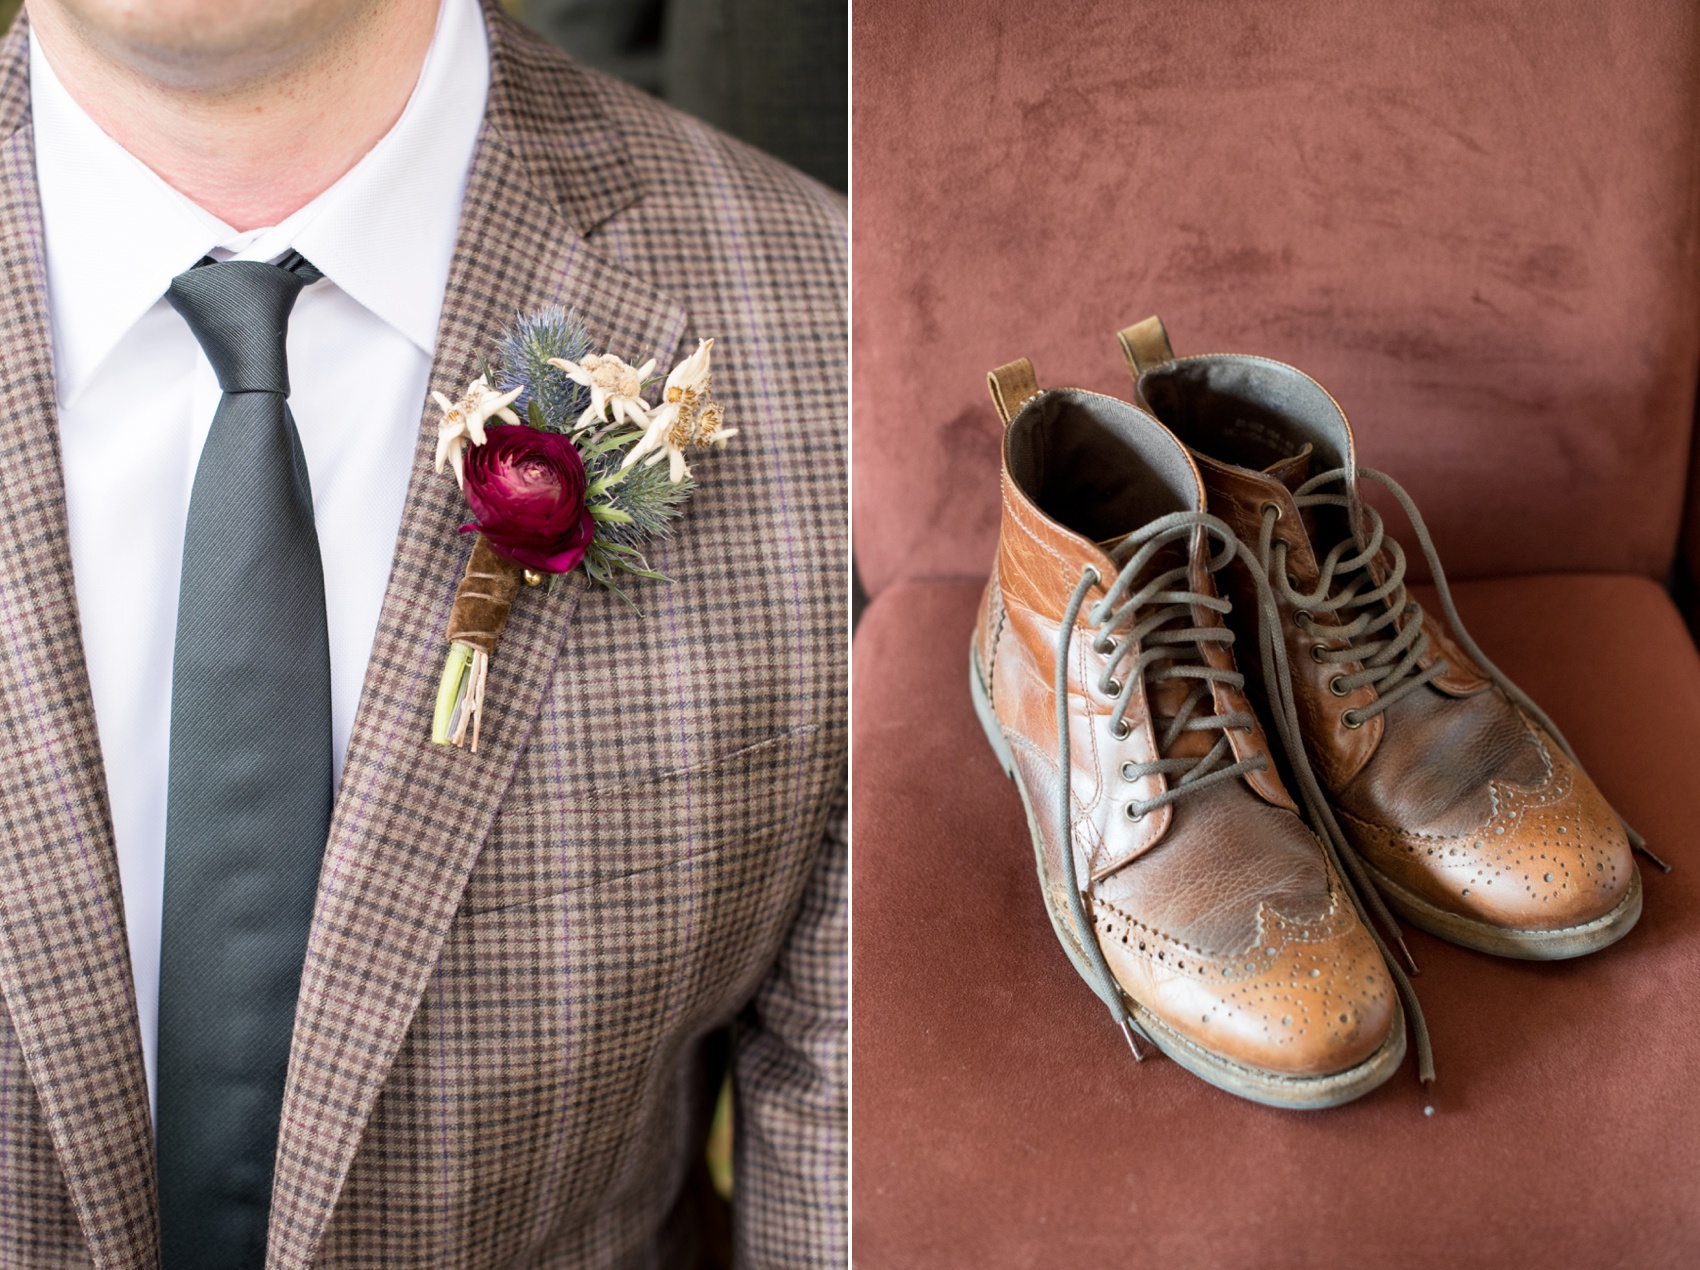 Crabtree Kittle's House wedding in NY. Images by Mikkel Paige Photography for a gay fall wedding.